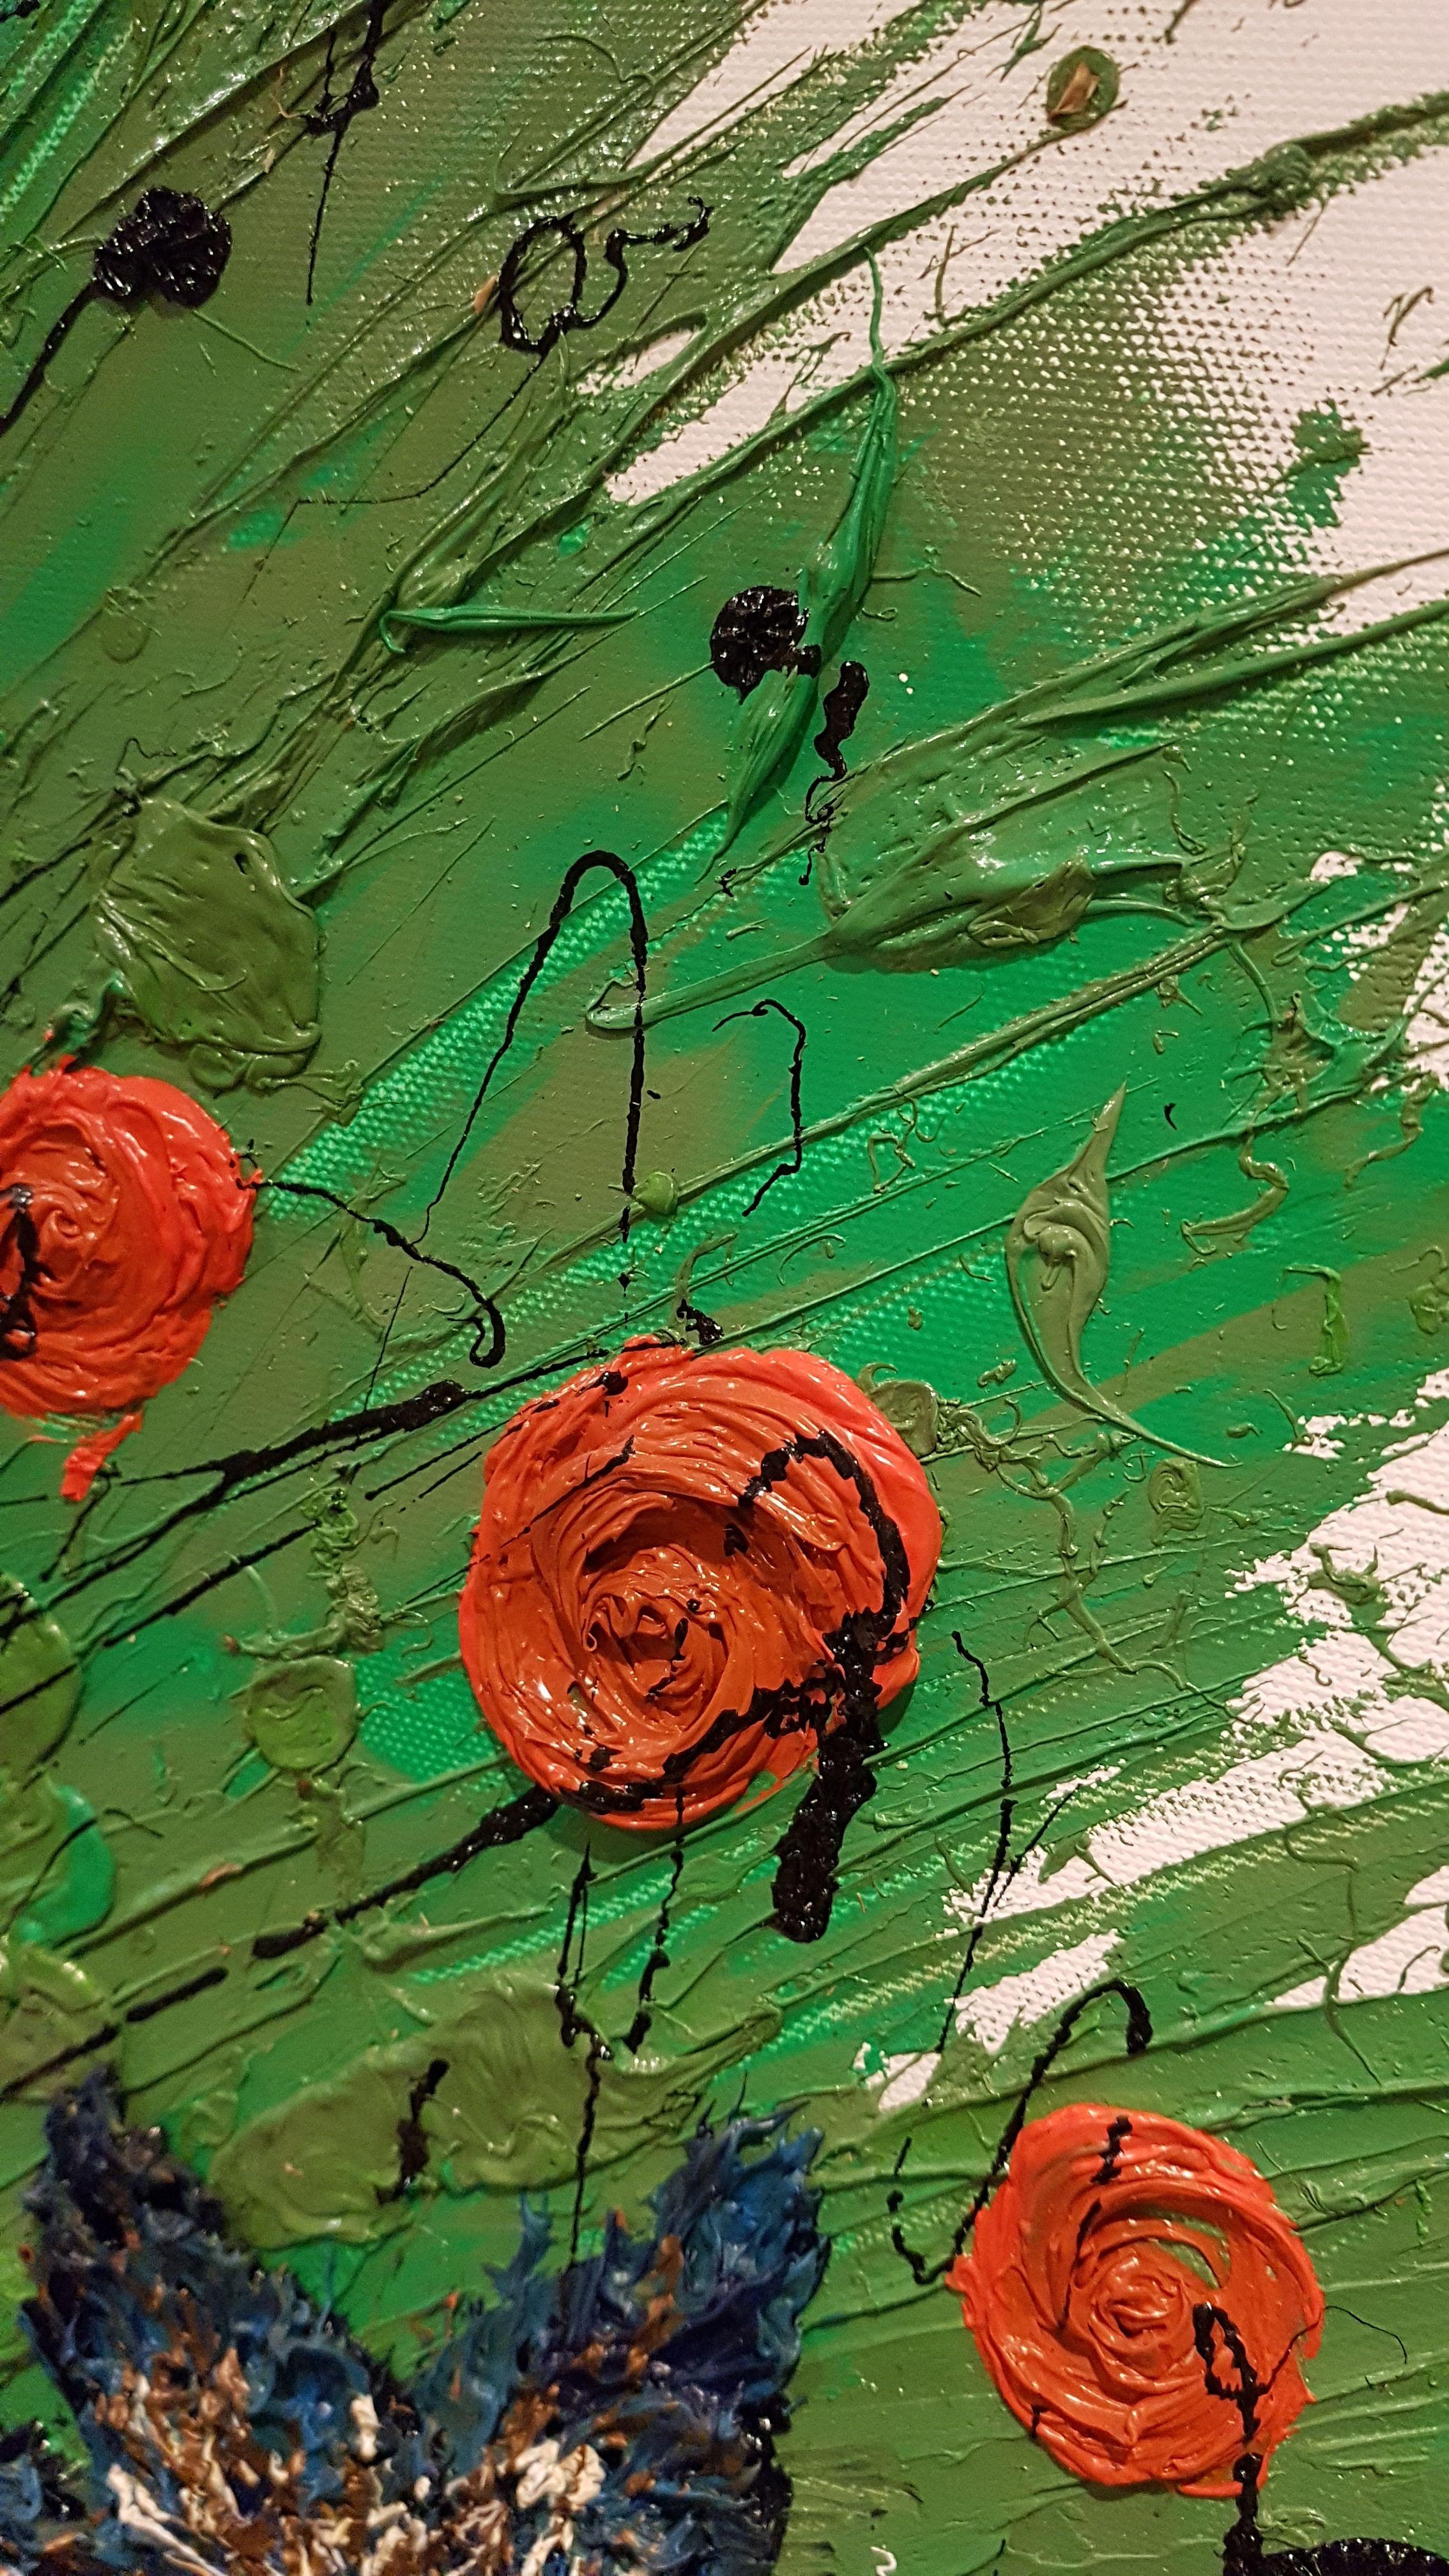 Floral Fantasy is a bold oil painting with the beauty of nature used as inspiration. Textured red-orange roses compliment unique flowers created with palette knives. Flowing green grass bursting with movement mimics wind blowing through blades of